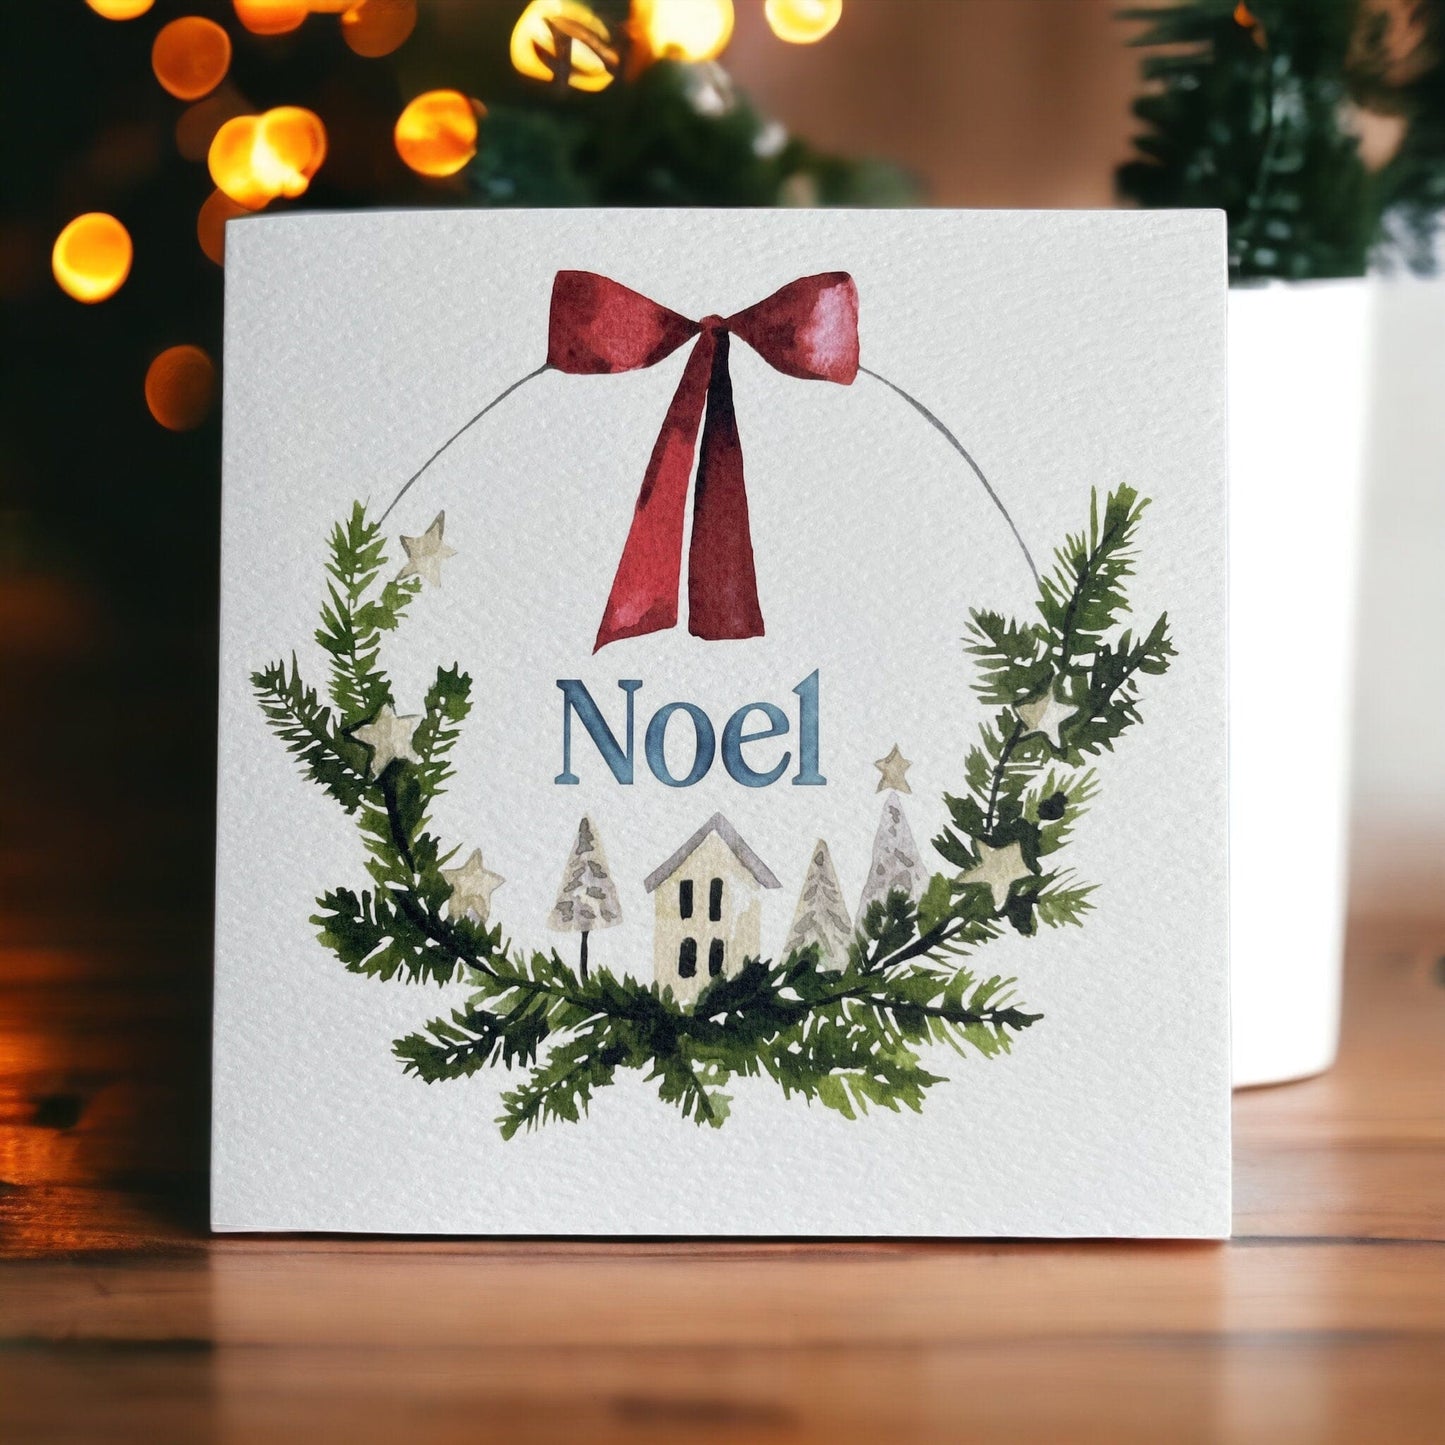 And Hope Designs Cards Christmas card - Noel with fir branch wreath